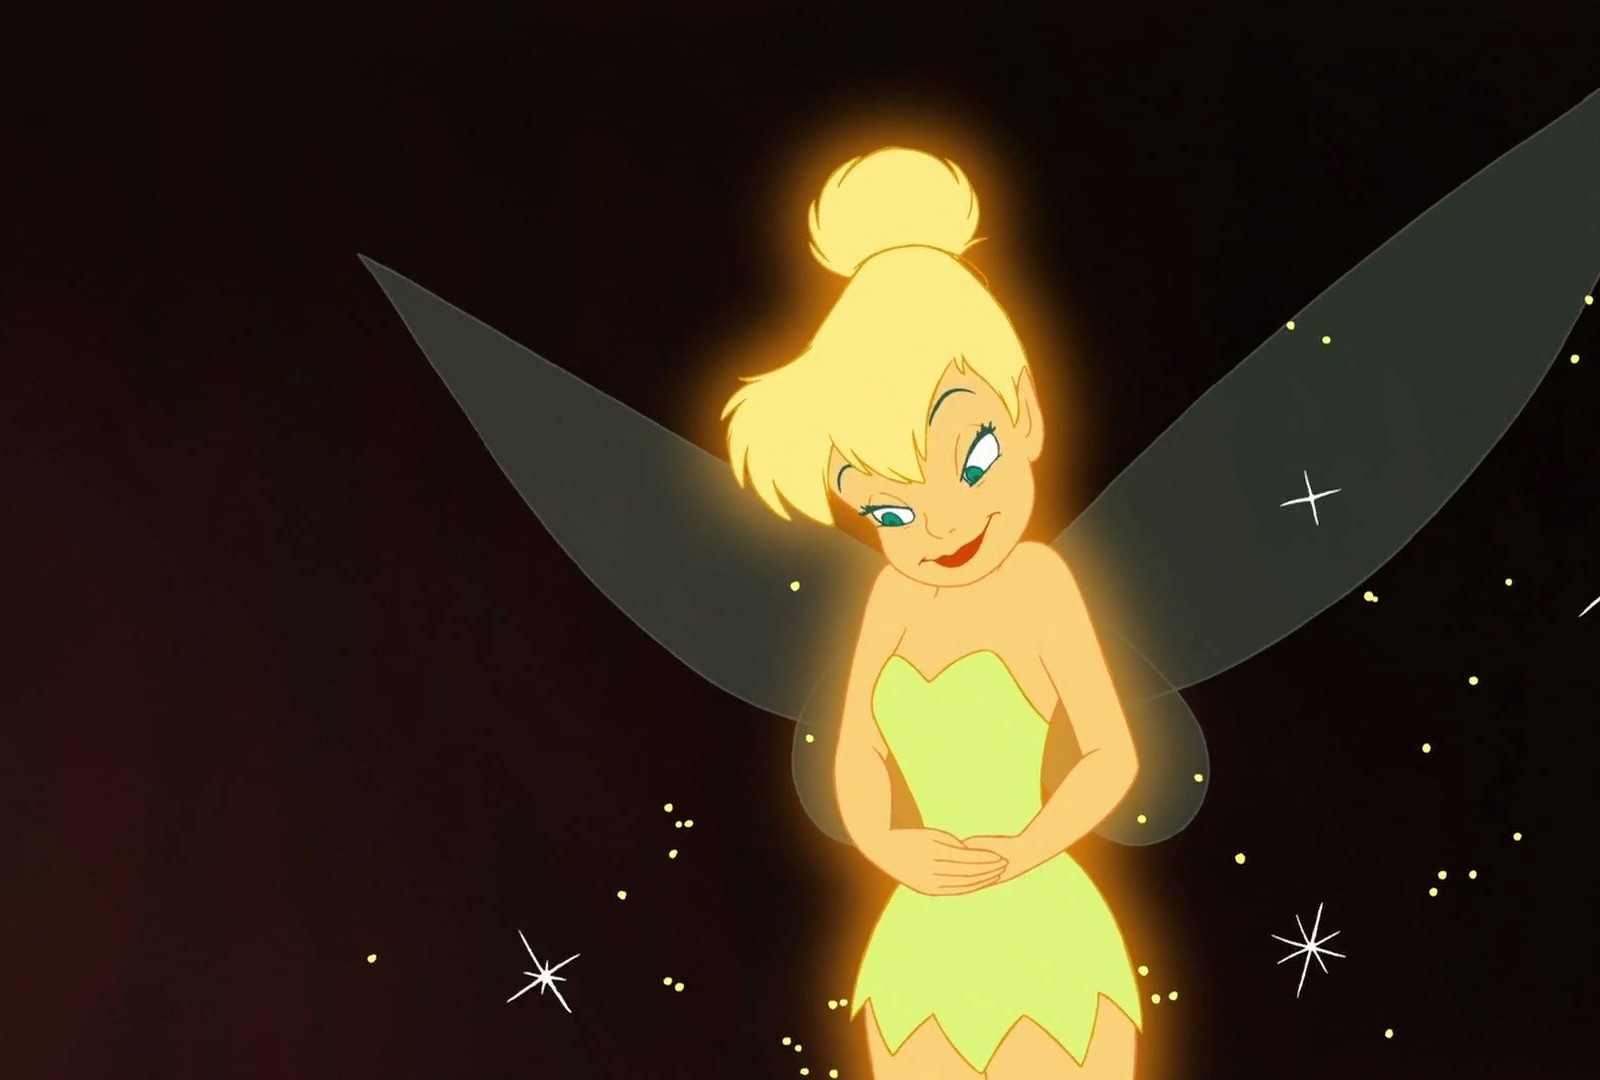 Can You Beat the Average Person in This General Knowledge Quiz? tinkerbell